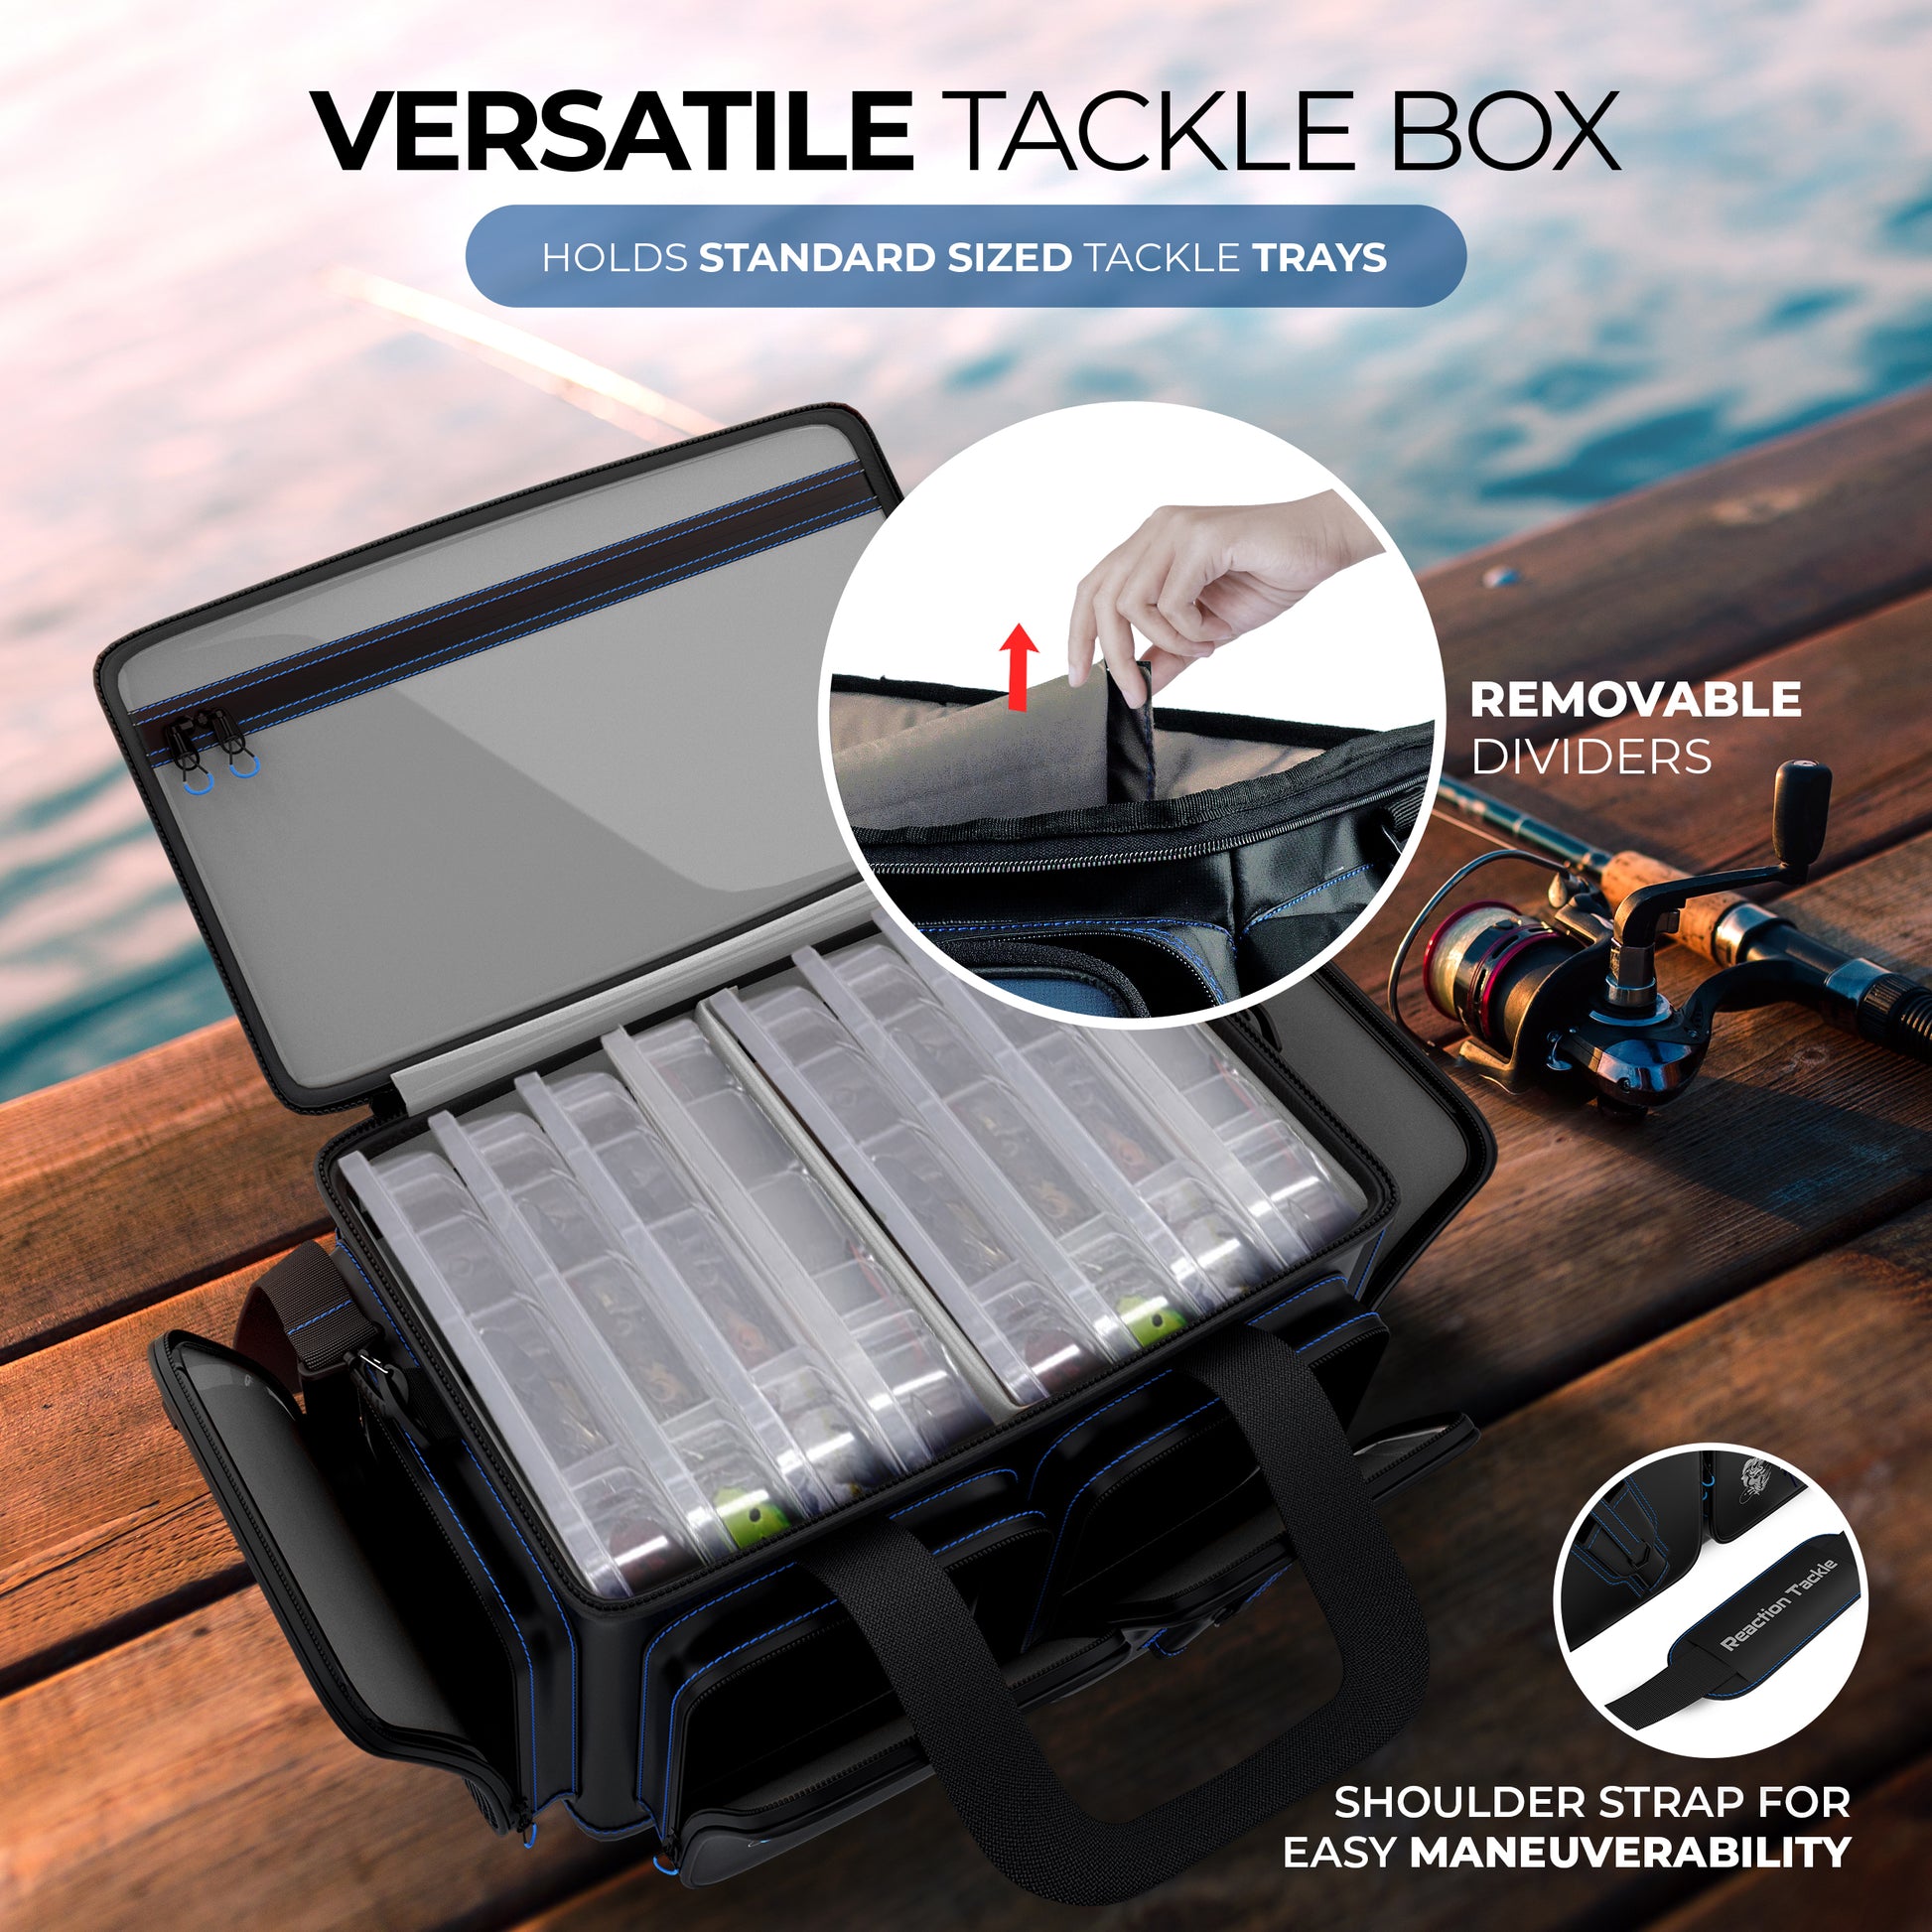 Wholesale clear tackle box To Store Your Fishing Gear 